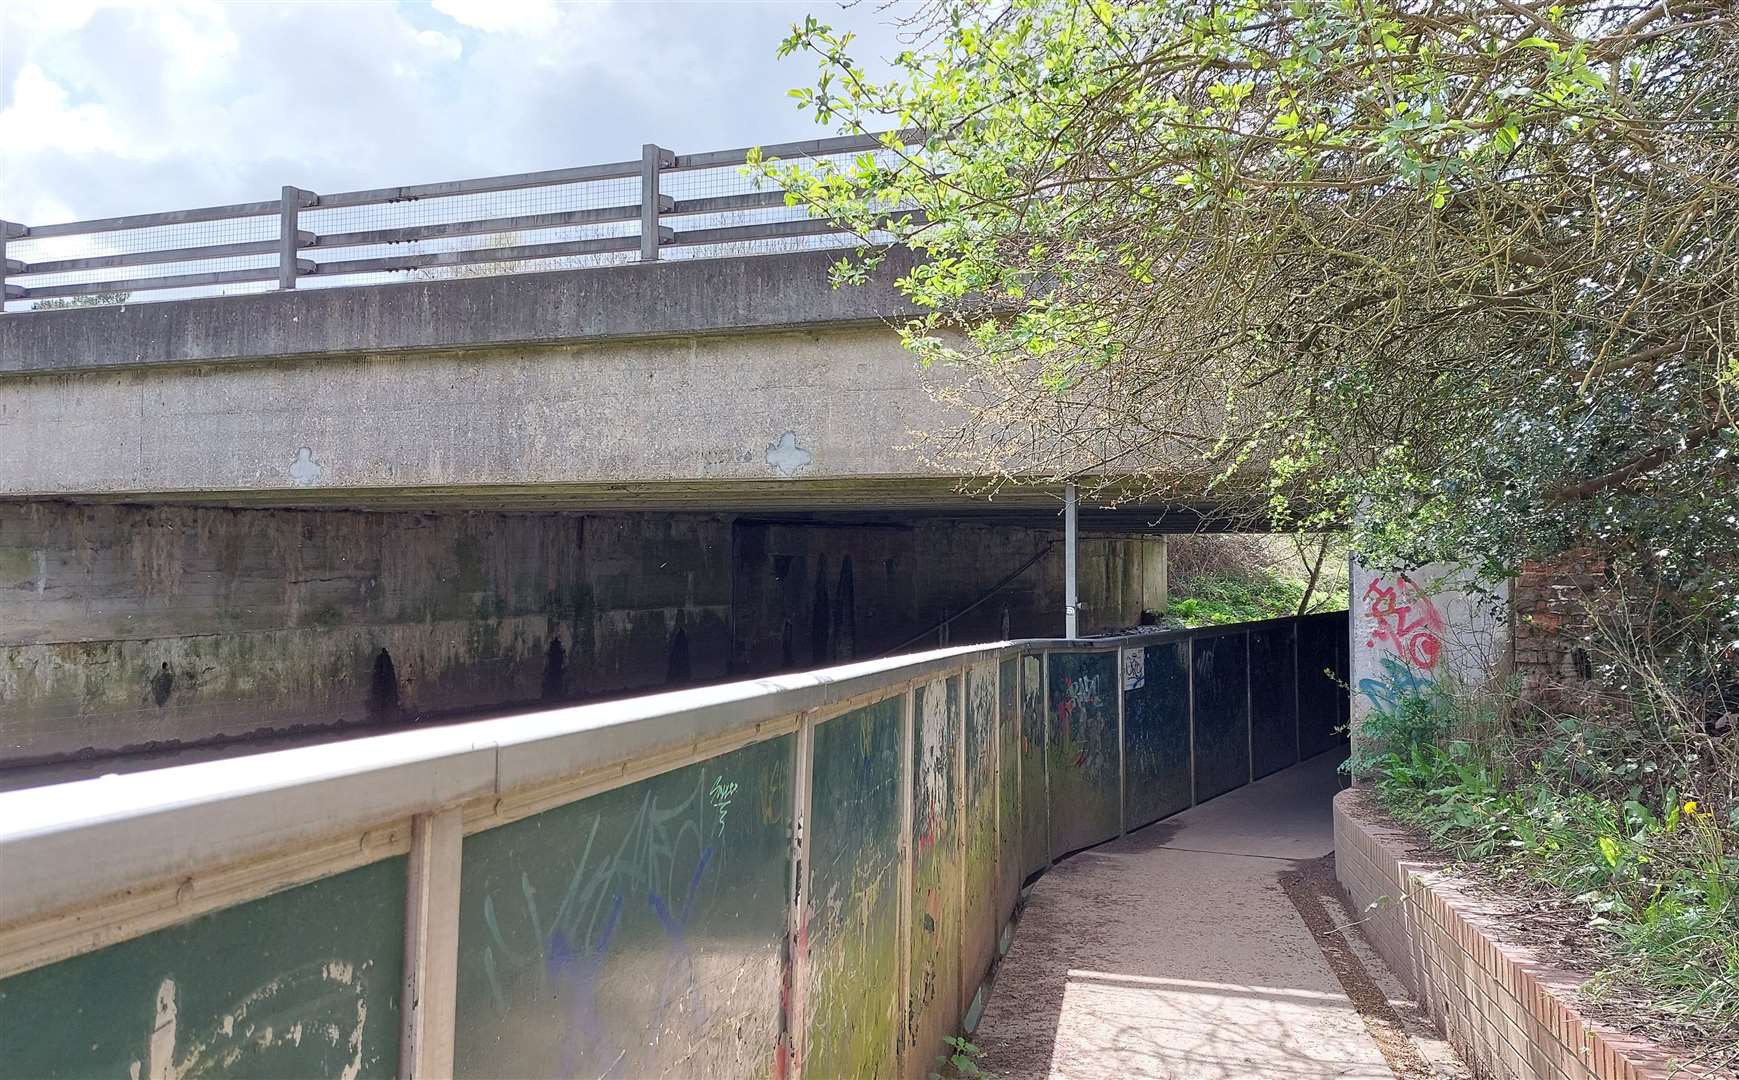 The M20 underpass is a popular route with pedestrians and cyclists